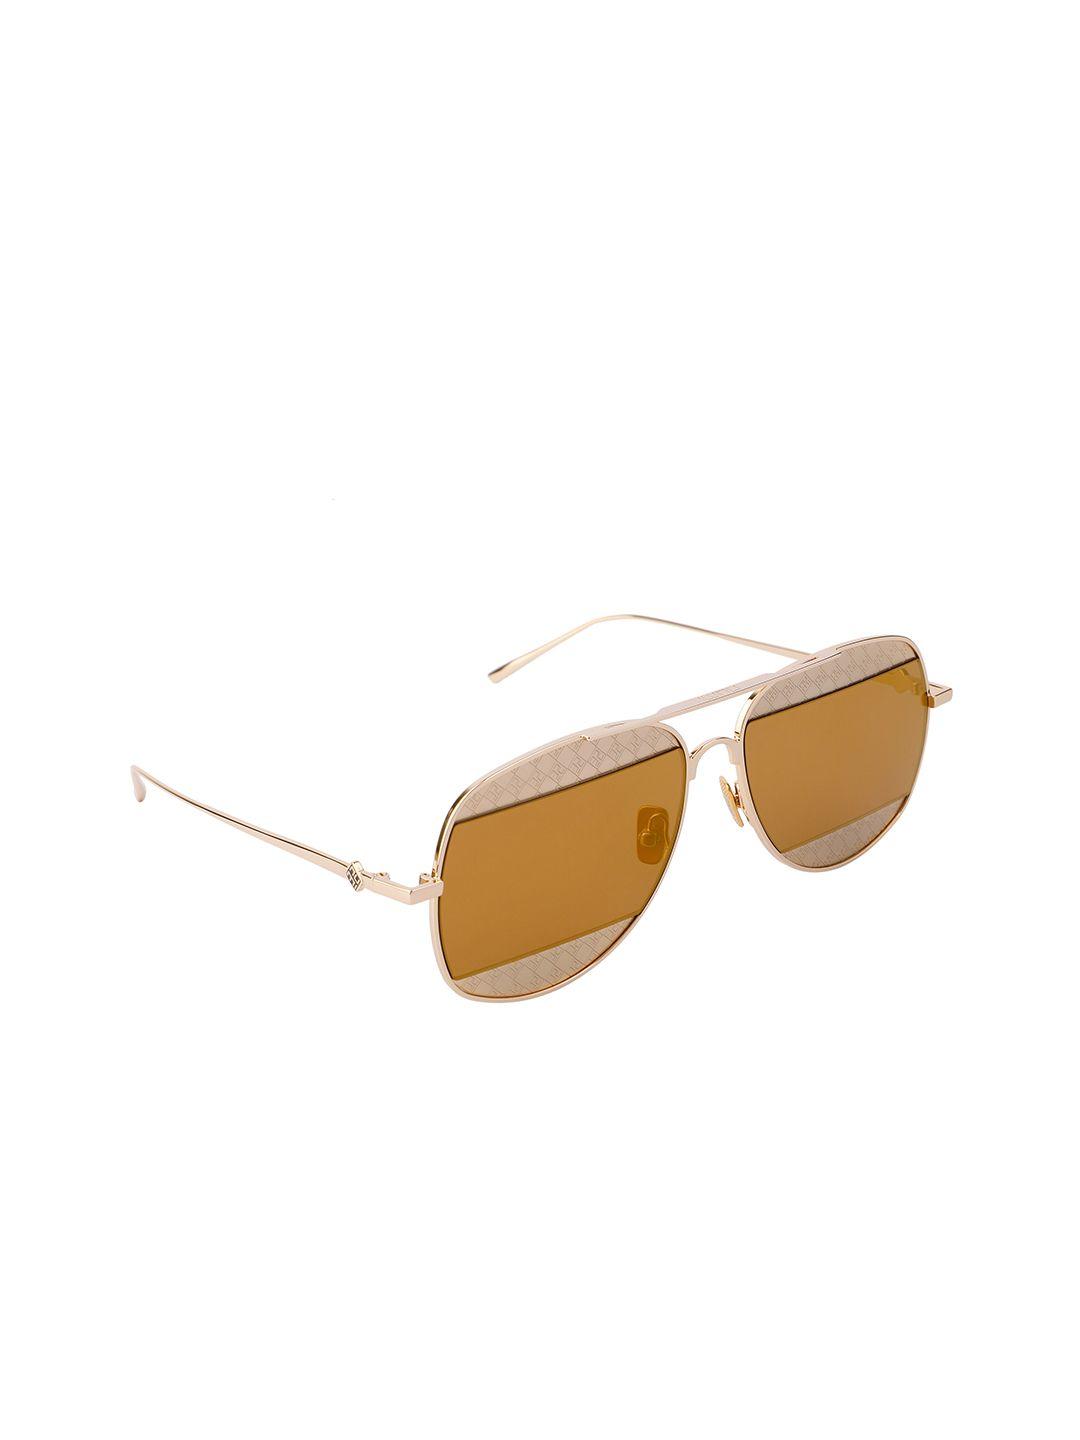 numi unisex brown lens & gold-toned aviator sunglasses with uv protected lens